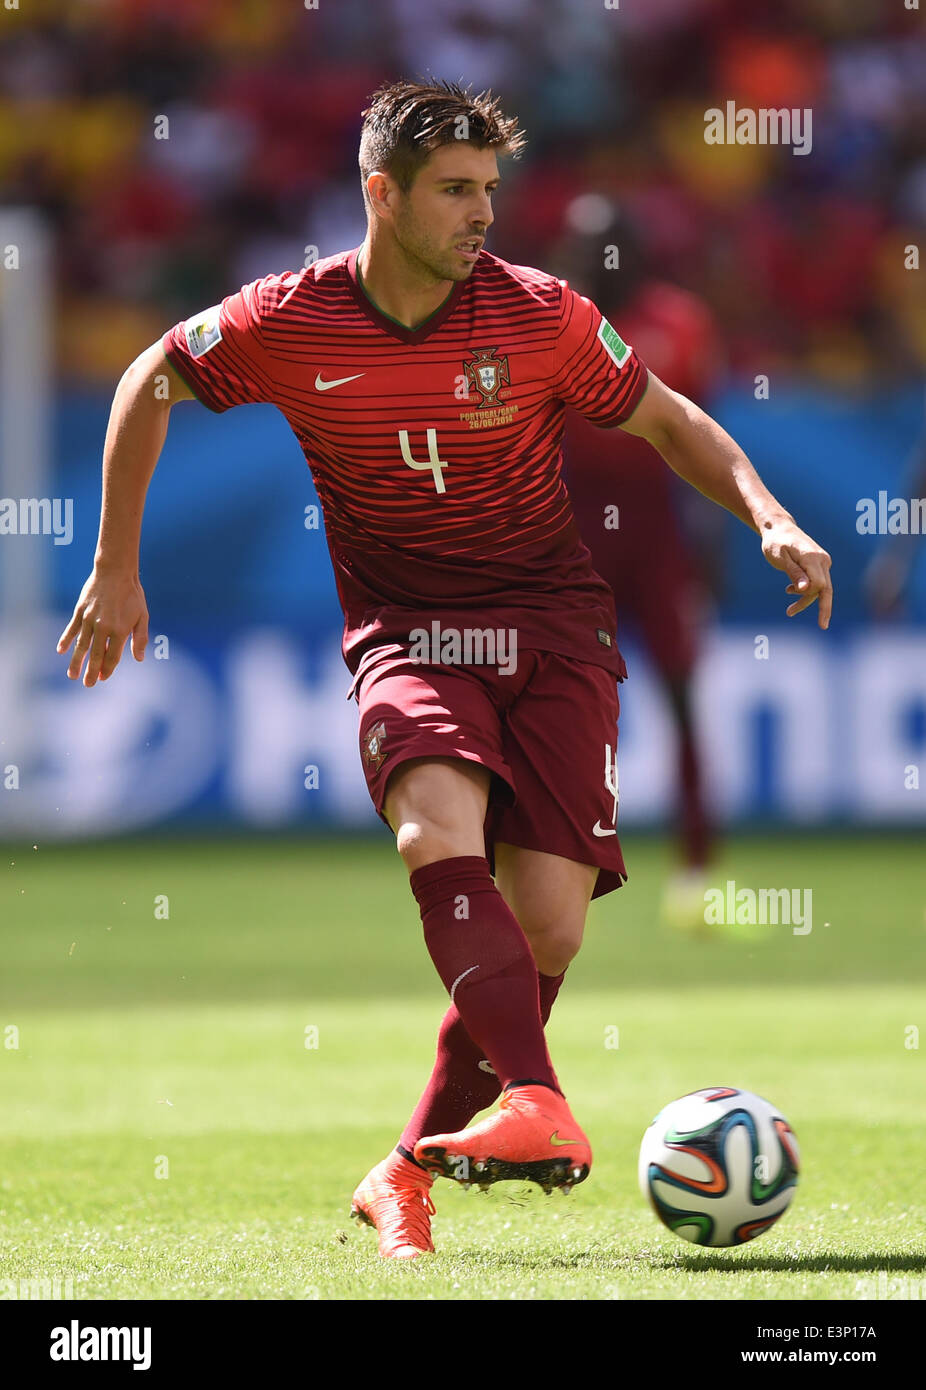 Brasilia, Brazil. 26th June, 2014. Miguel Veloso of Portugal in action during the FIFA World Cup 2014 group G preliminary round match between Portugal and Ghana at the Estadio National Stadium in Brasilia, Brazil, on 26 June 2014 Credit: © dpa picture alliance/Alamy Live News  Stock Photo